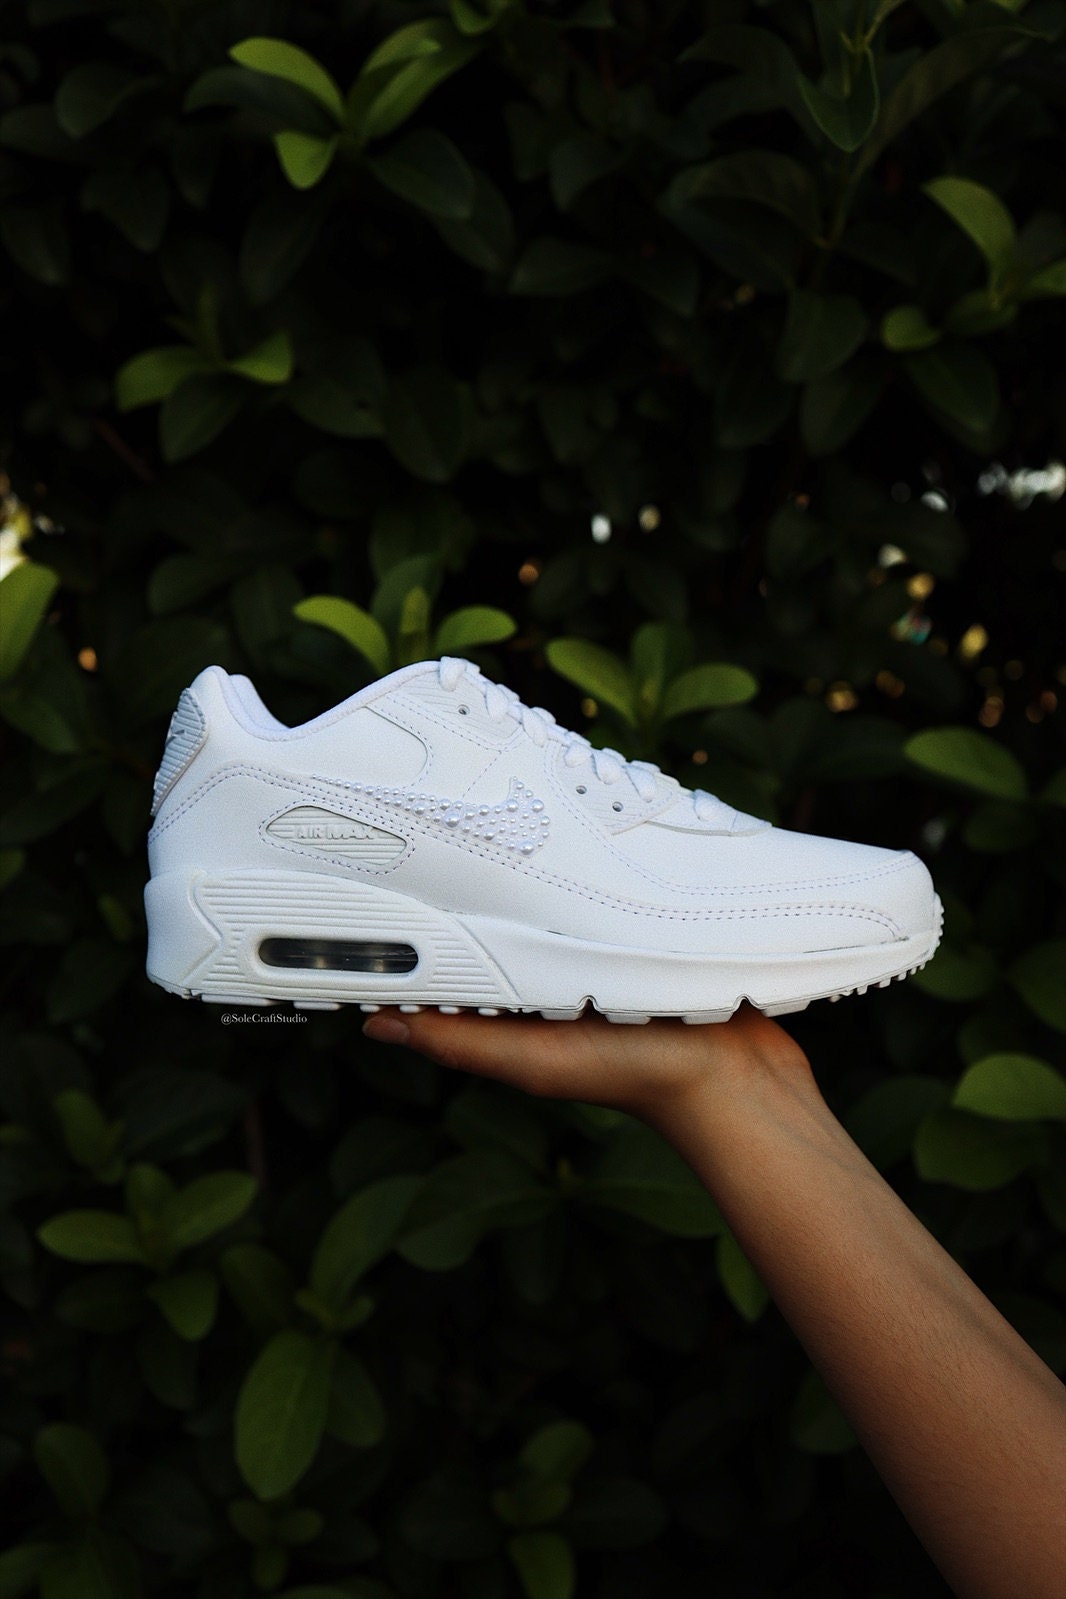 Wedding Shoes For The Bride Personalized Custom Air Max 90 Pearls Swoosh